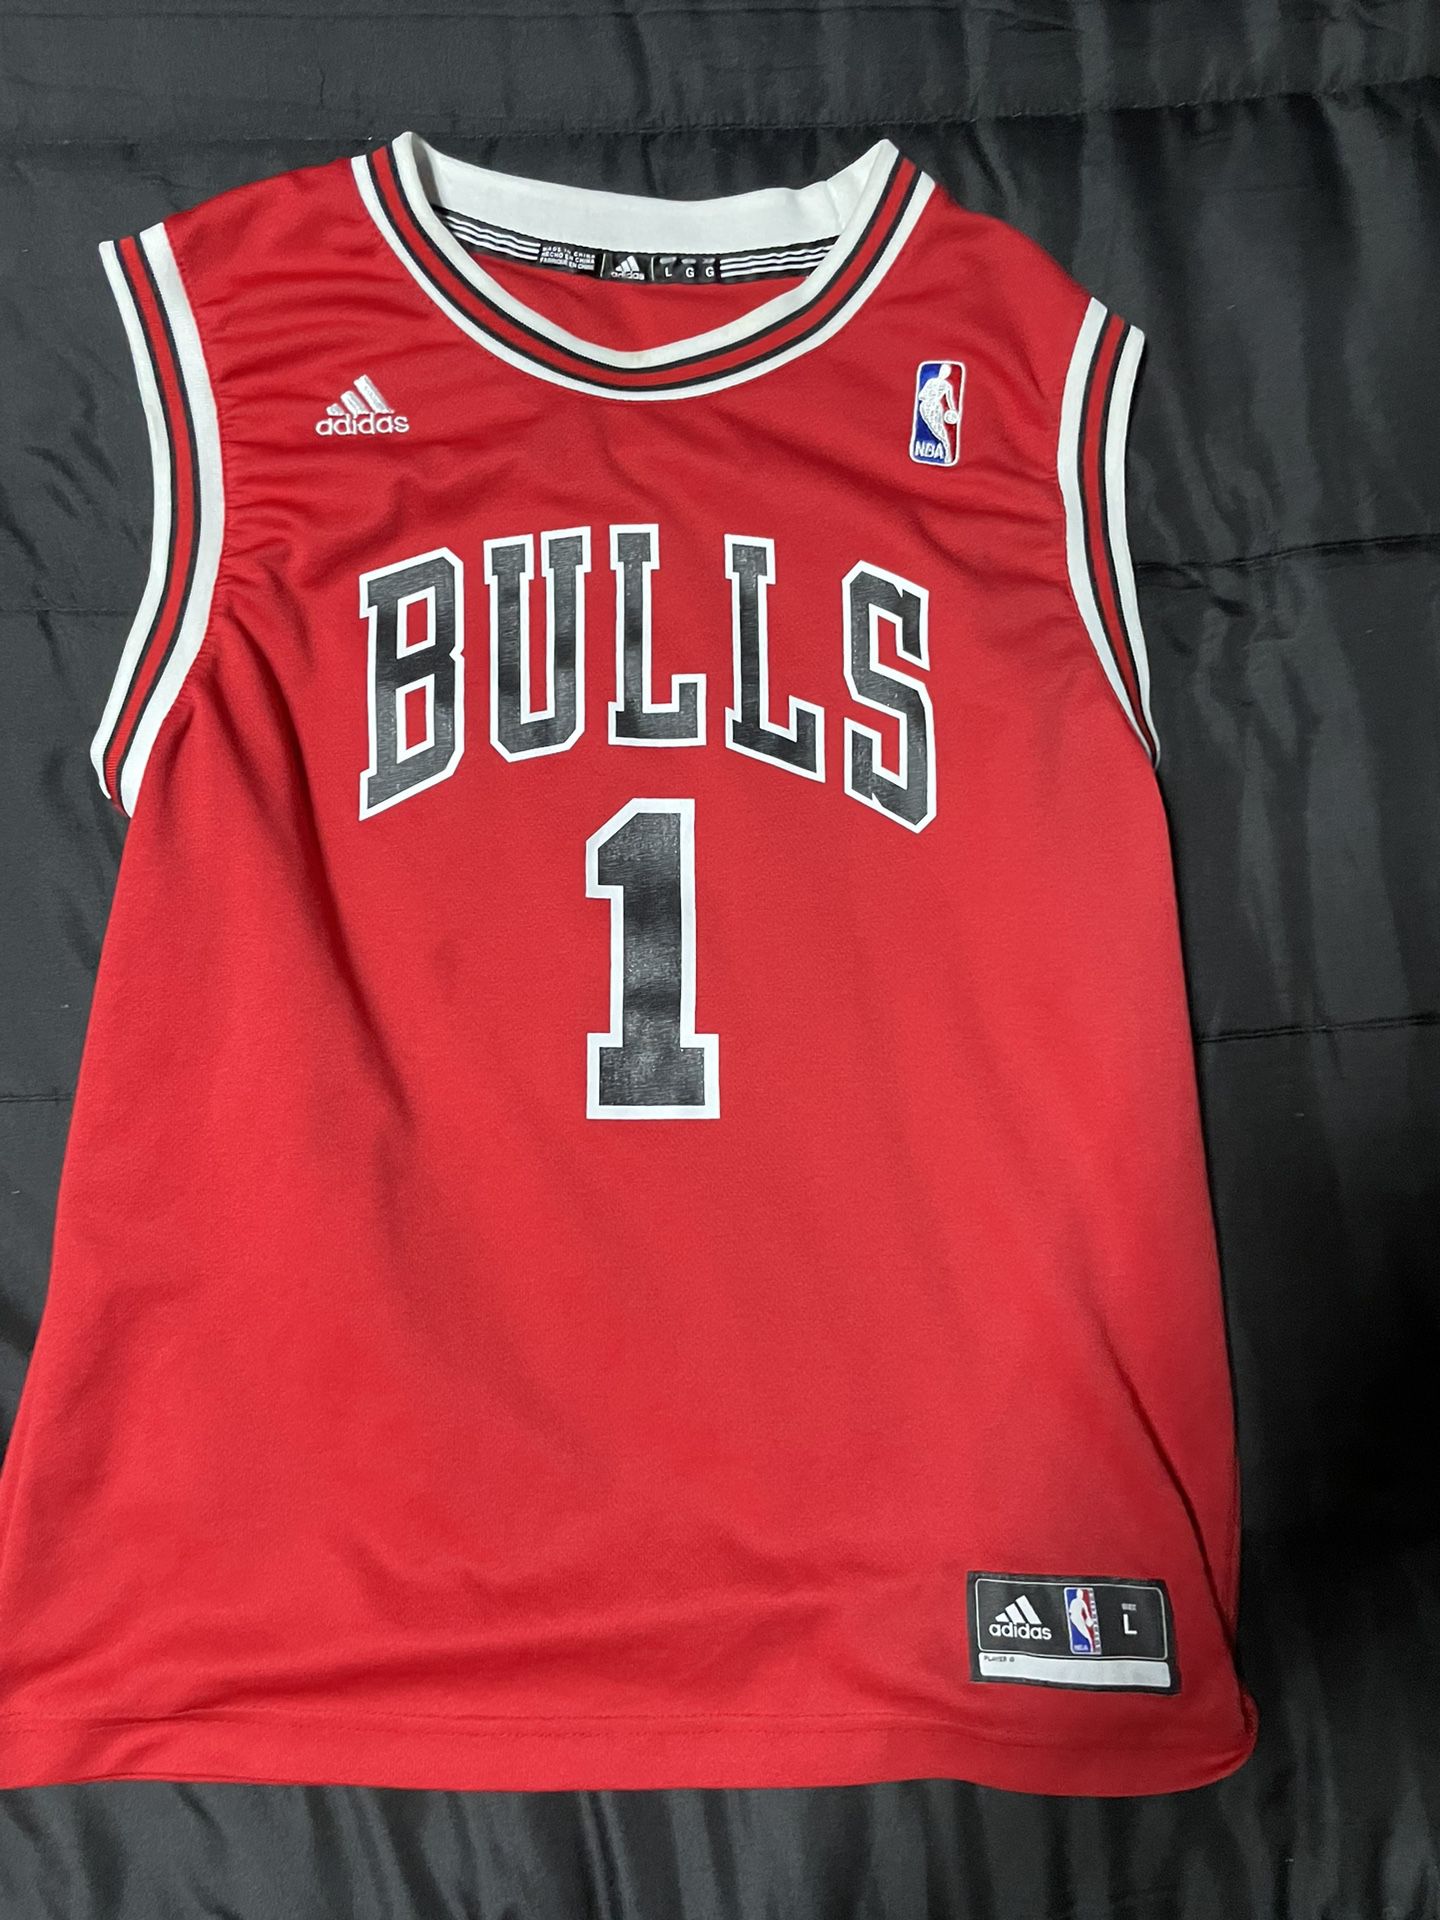 Derrick Rose Authentic Bulls Jersey for Sale in El Paso, TX - OfferUp